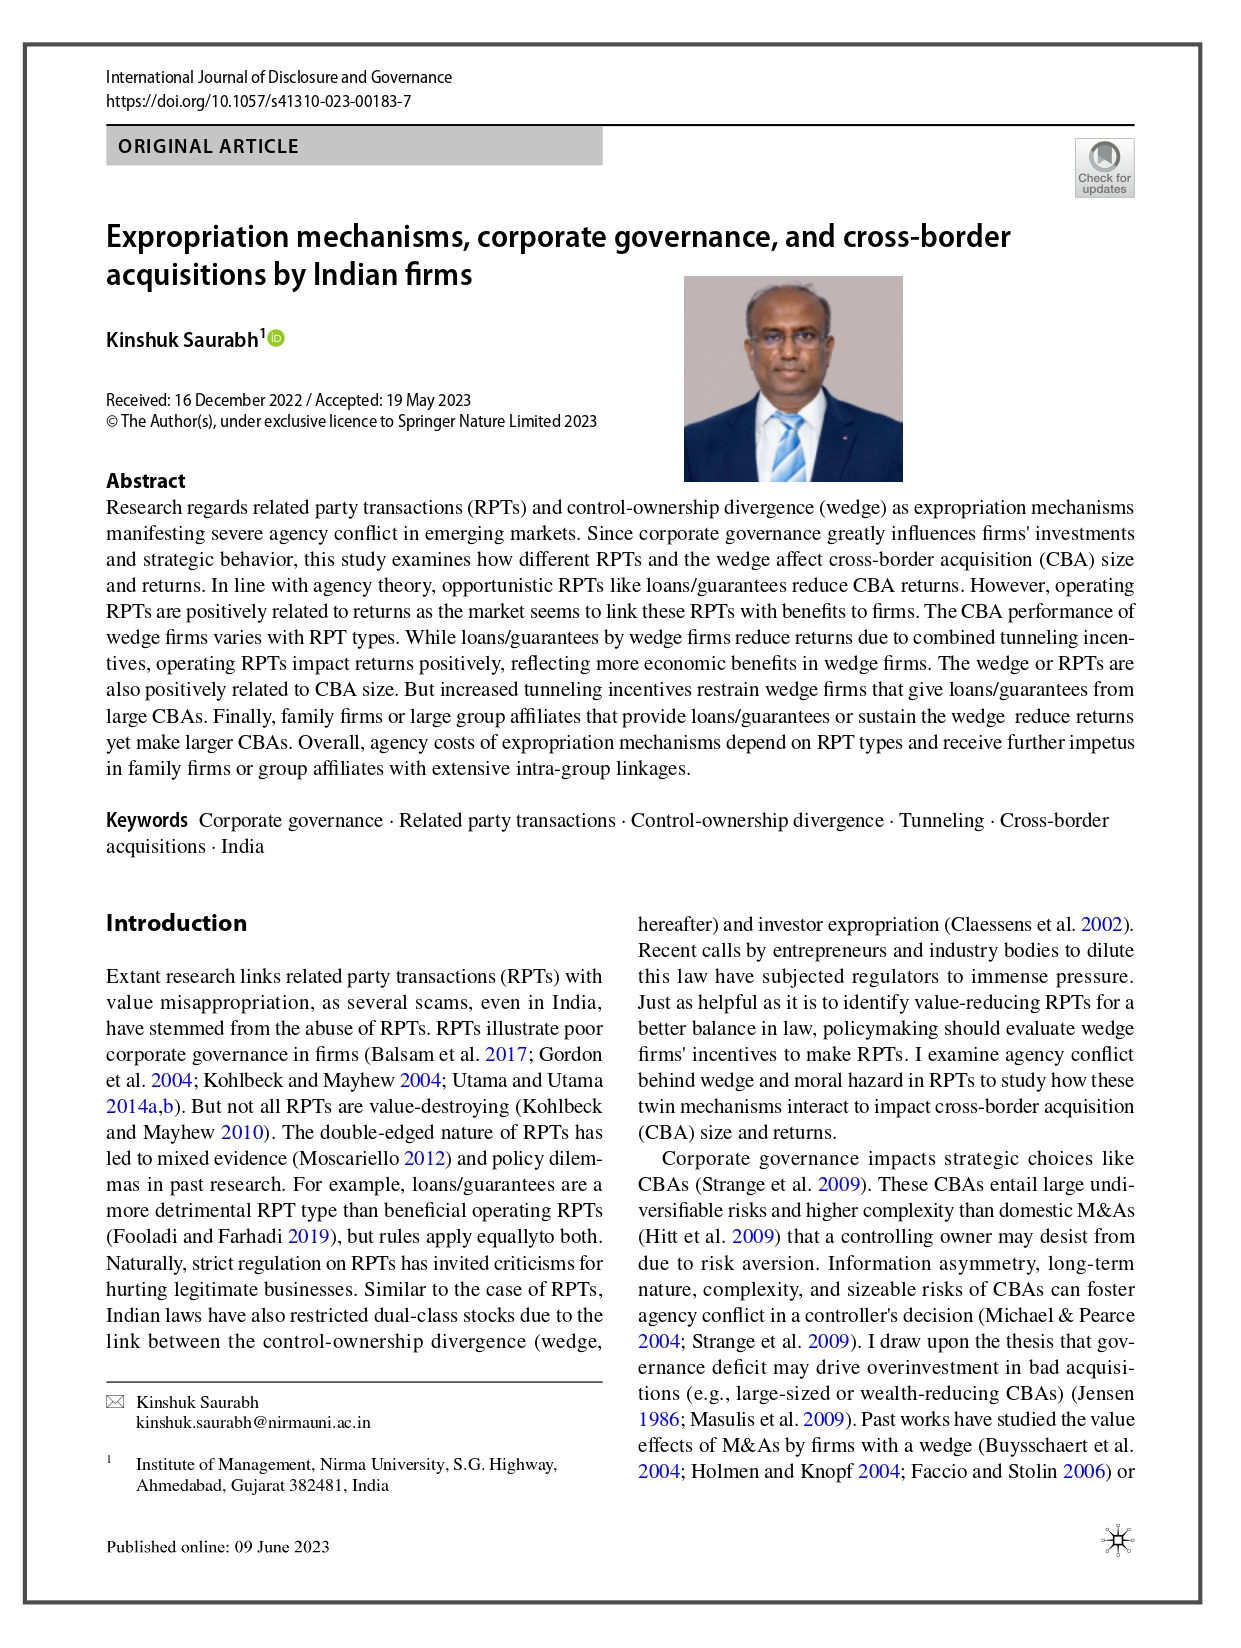 Expropriation mechanisms, corporate governance and cross-border acquisitions by Indian firms